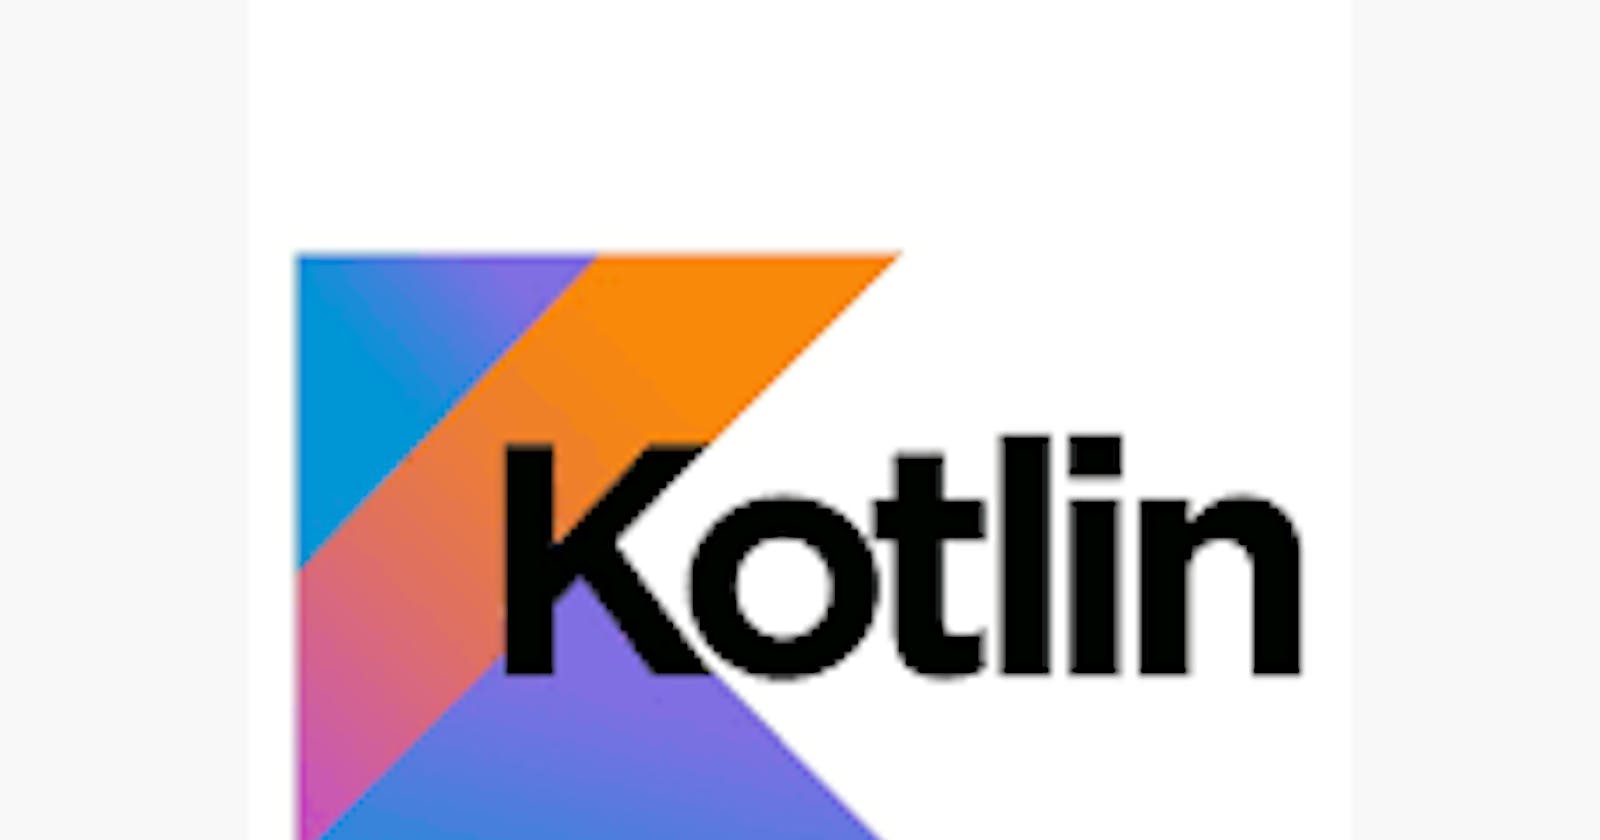 Create your first app using Kotlin